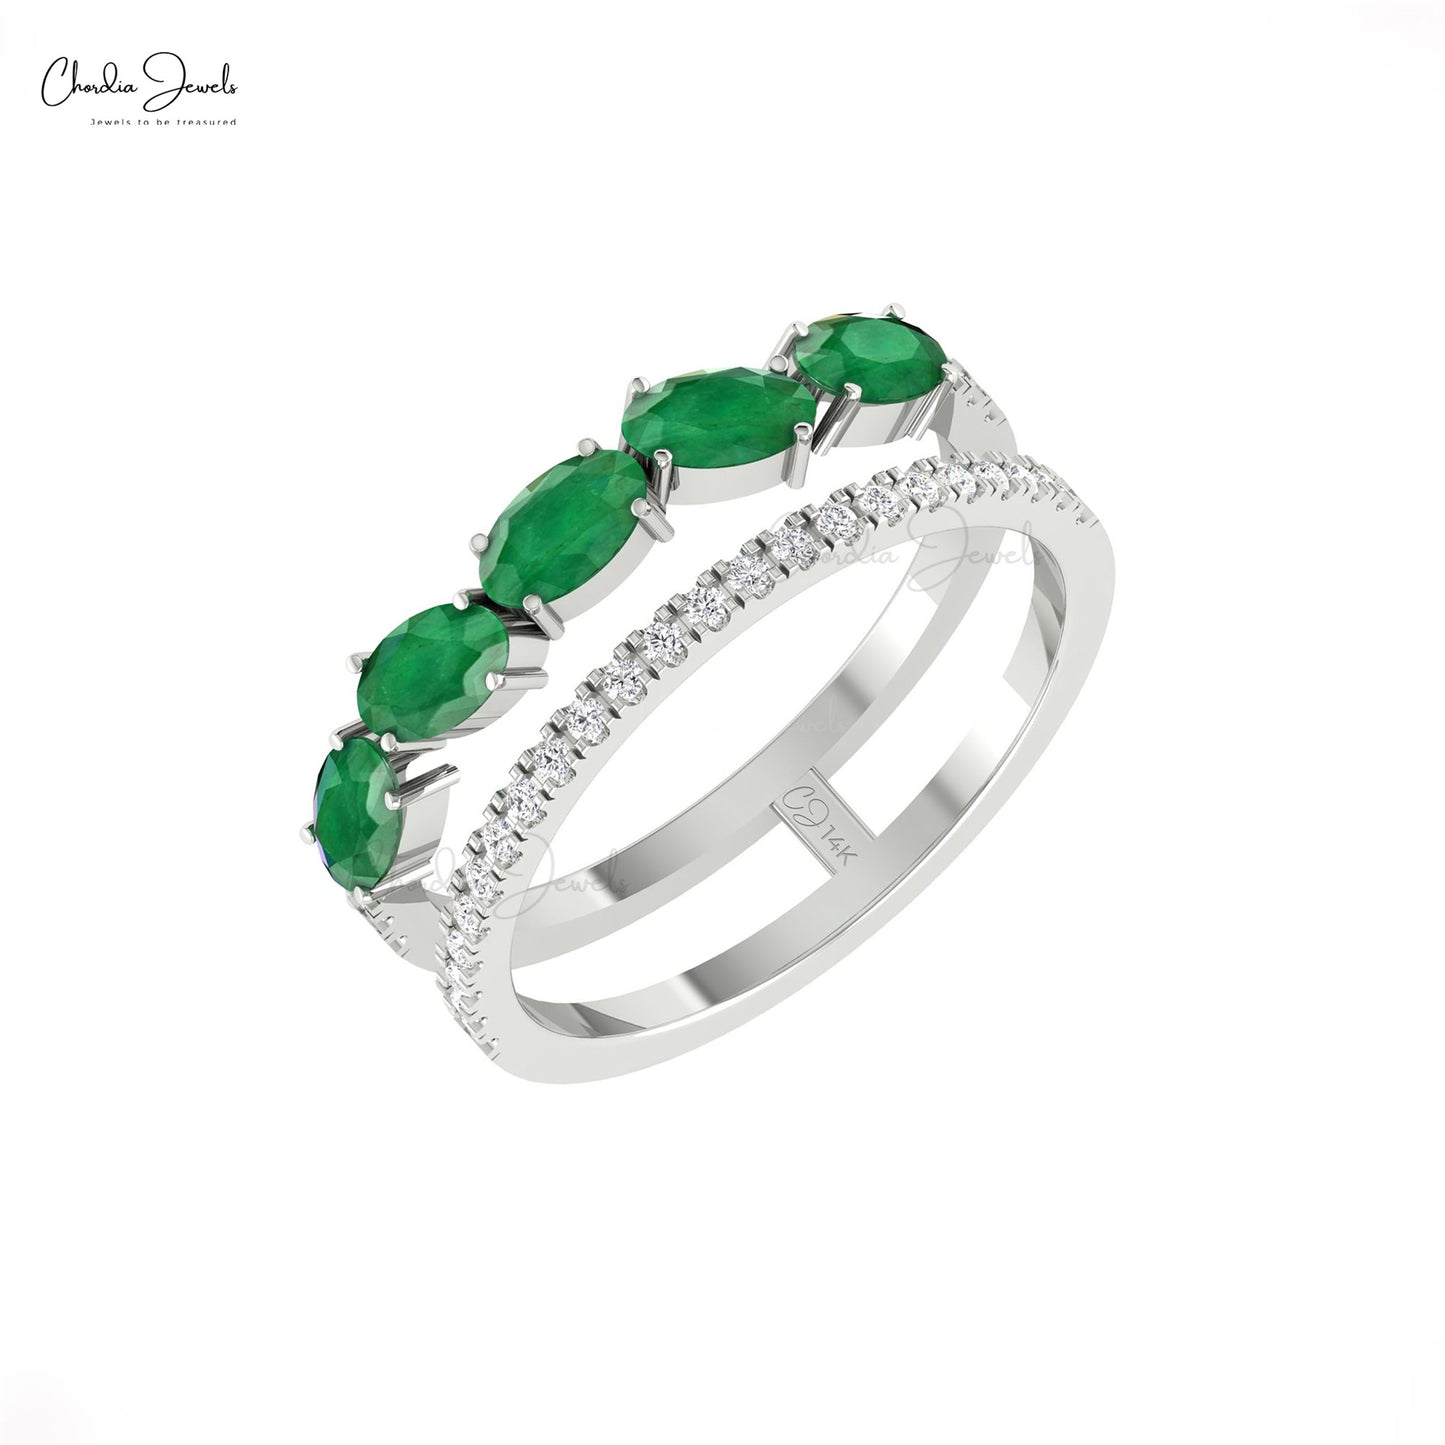 Adorn yourself with this 14k real gold emerald ring.